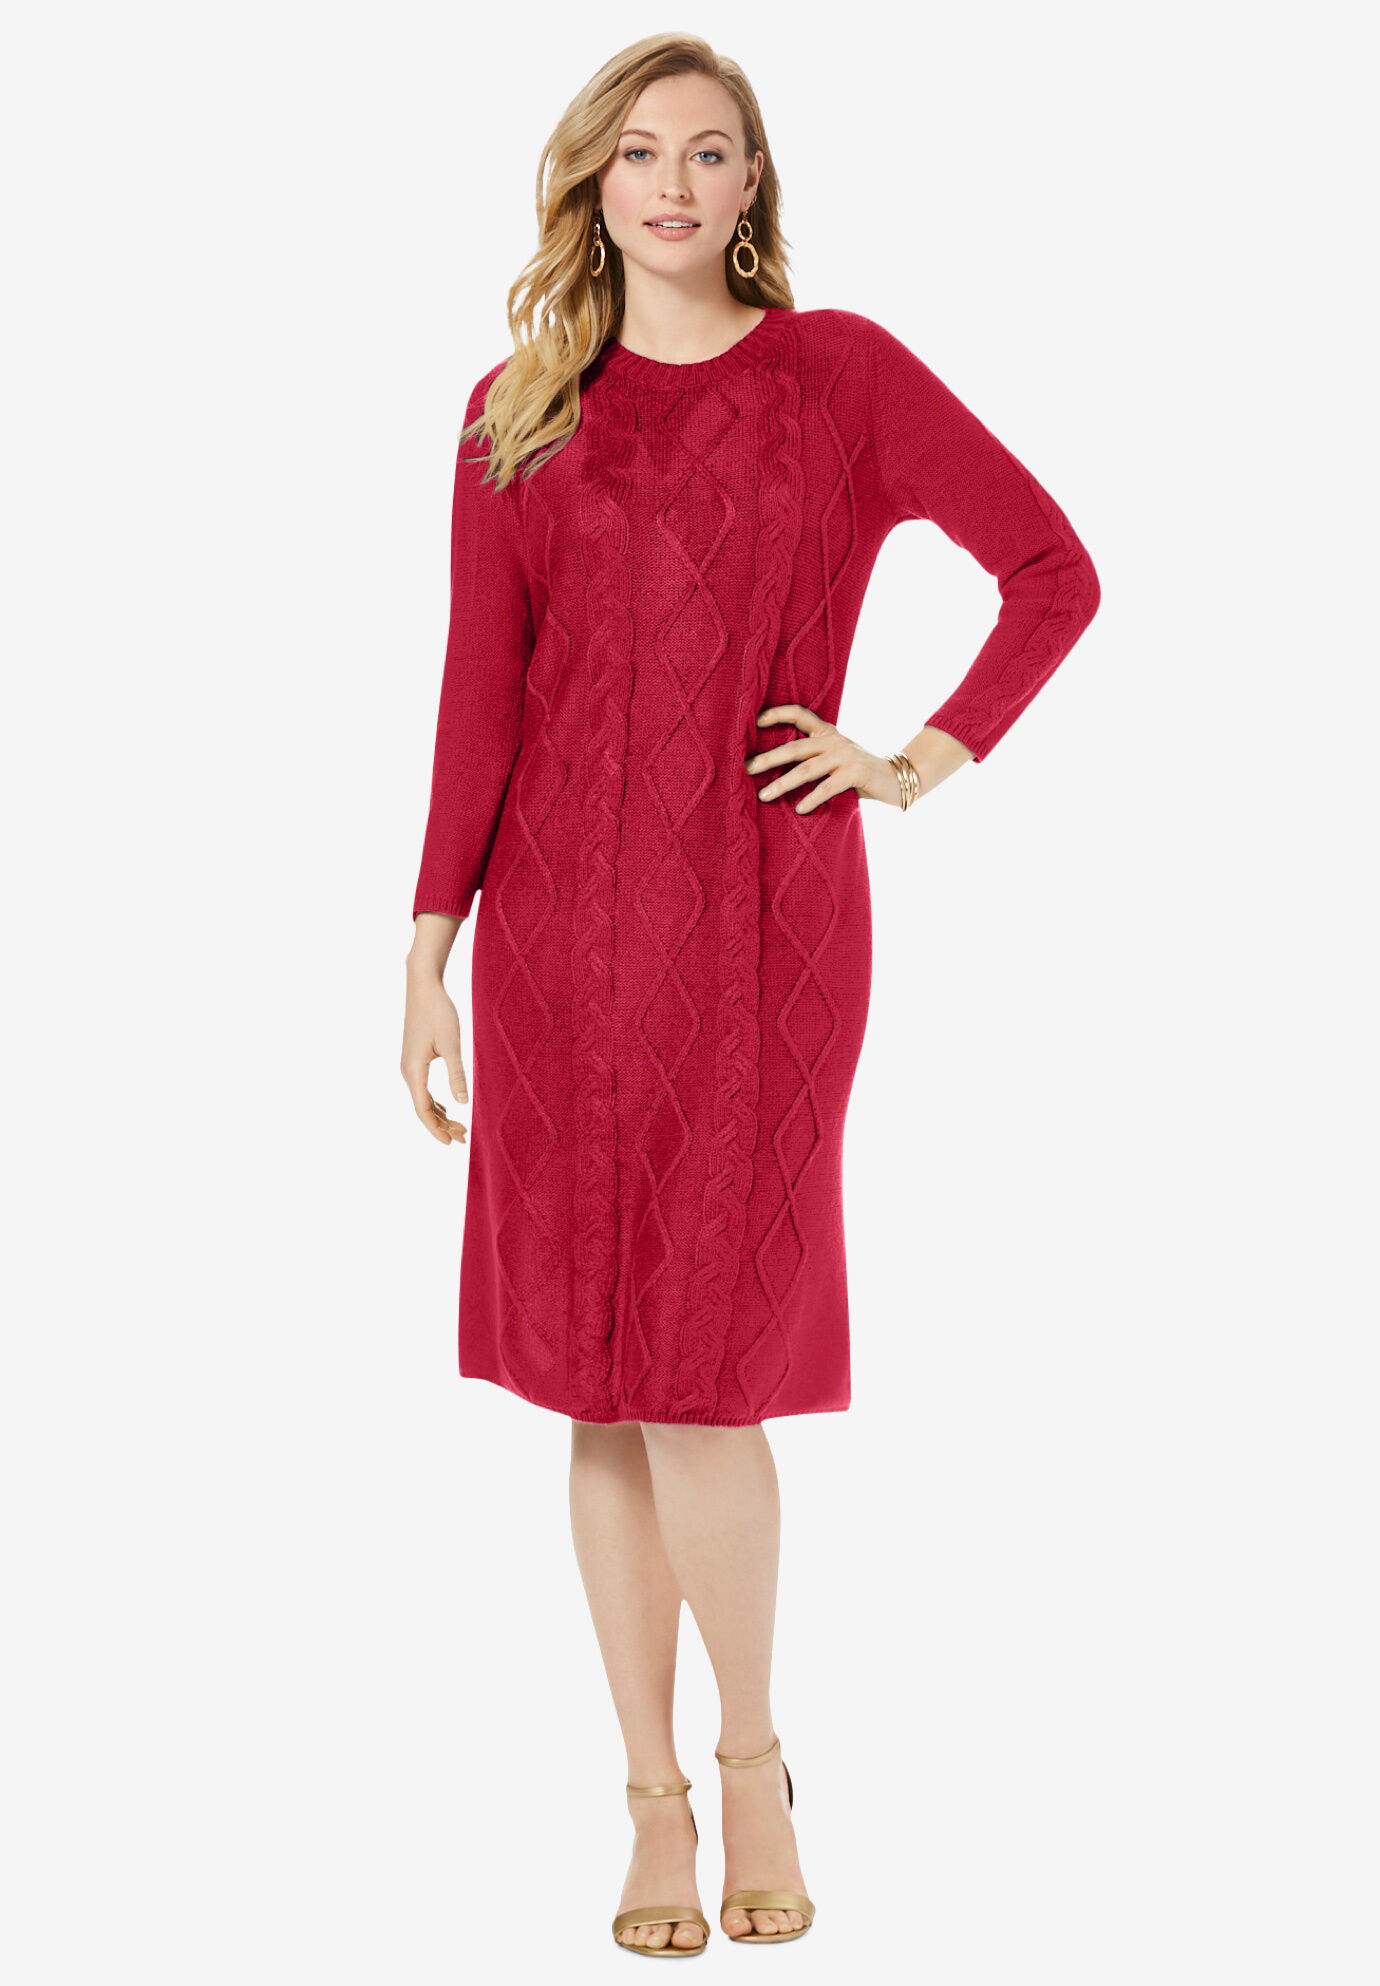 red sweater dress plus size